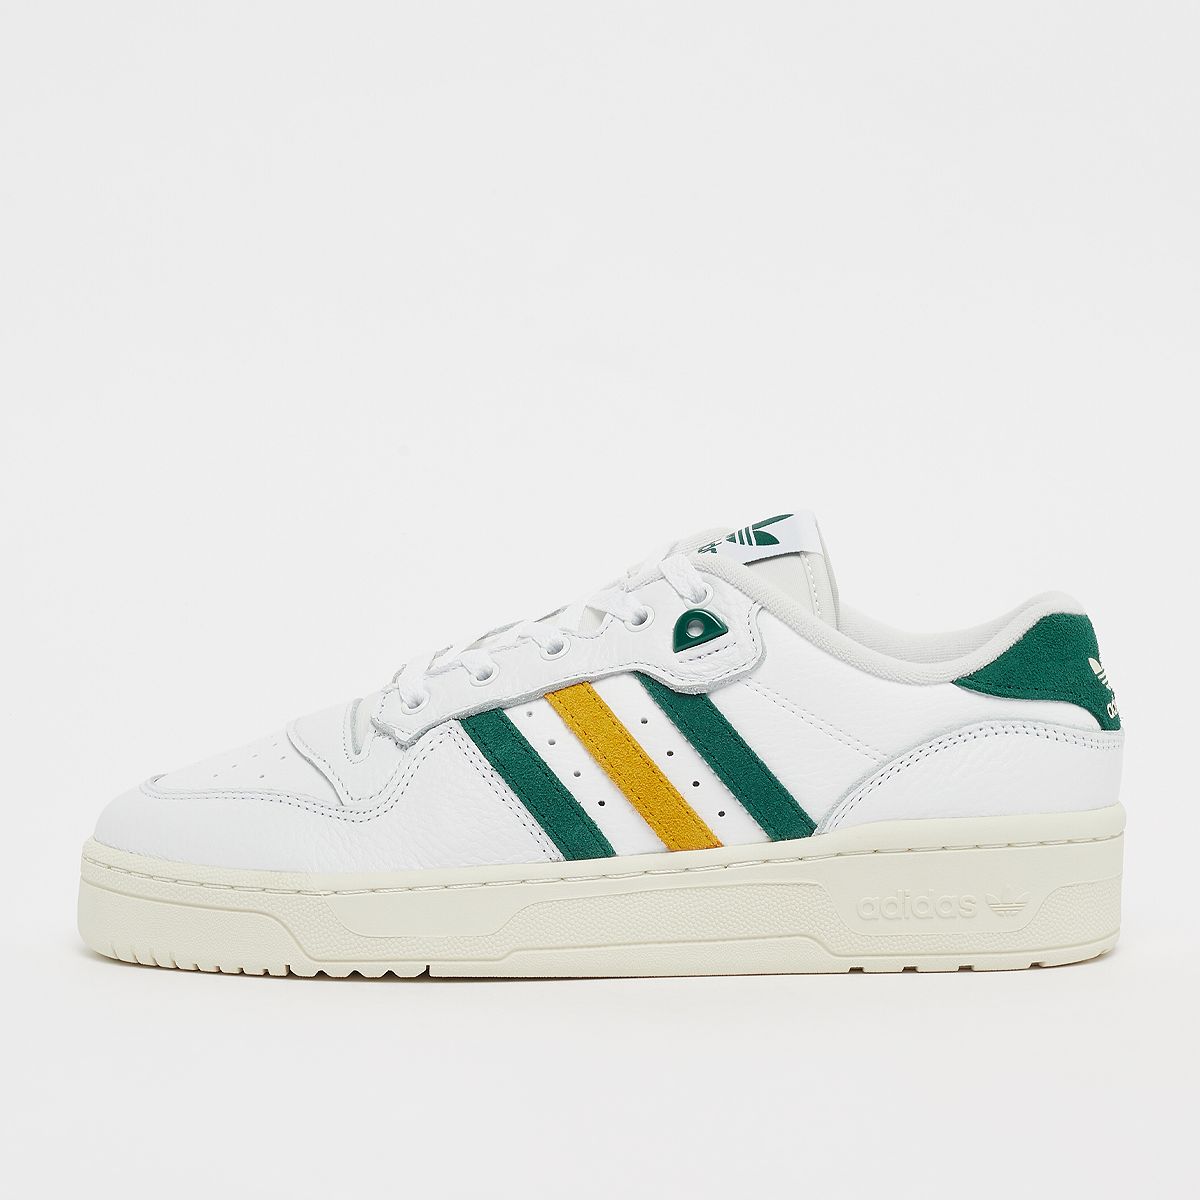 Sneaker Rivalry Low, adidas Originals, Footwear, off white/collegiate green/off white, taille: 44 2/3